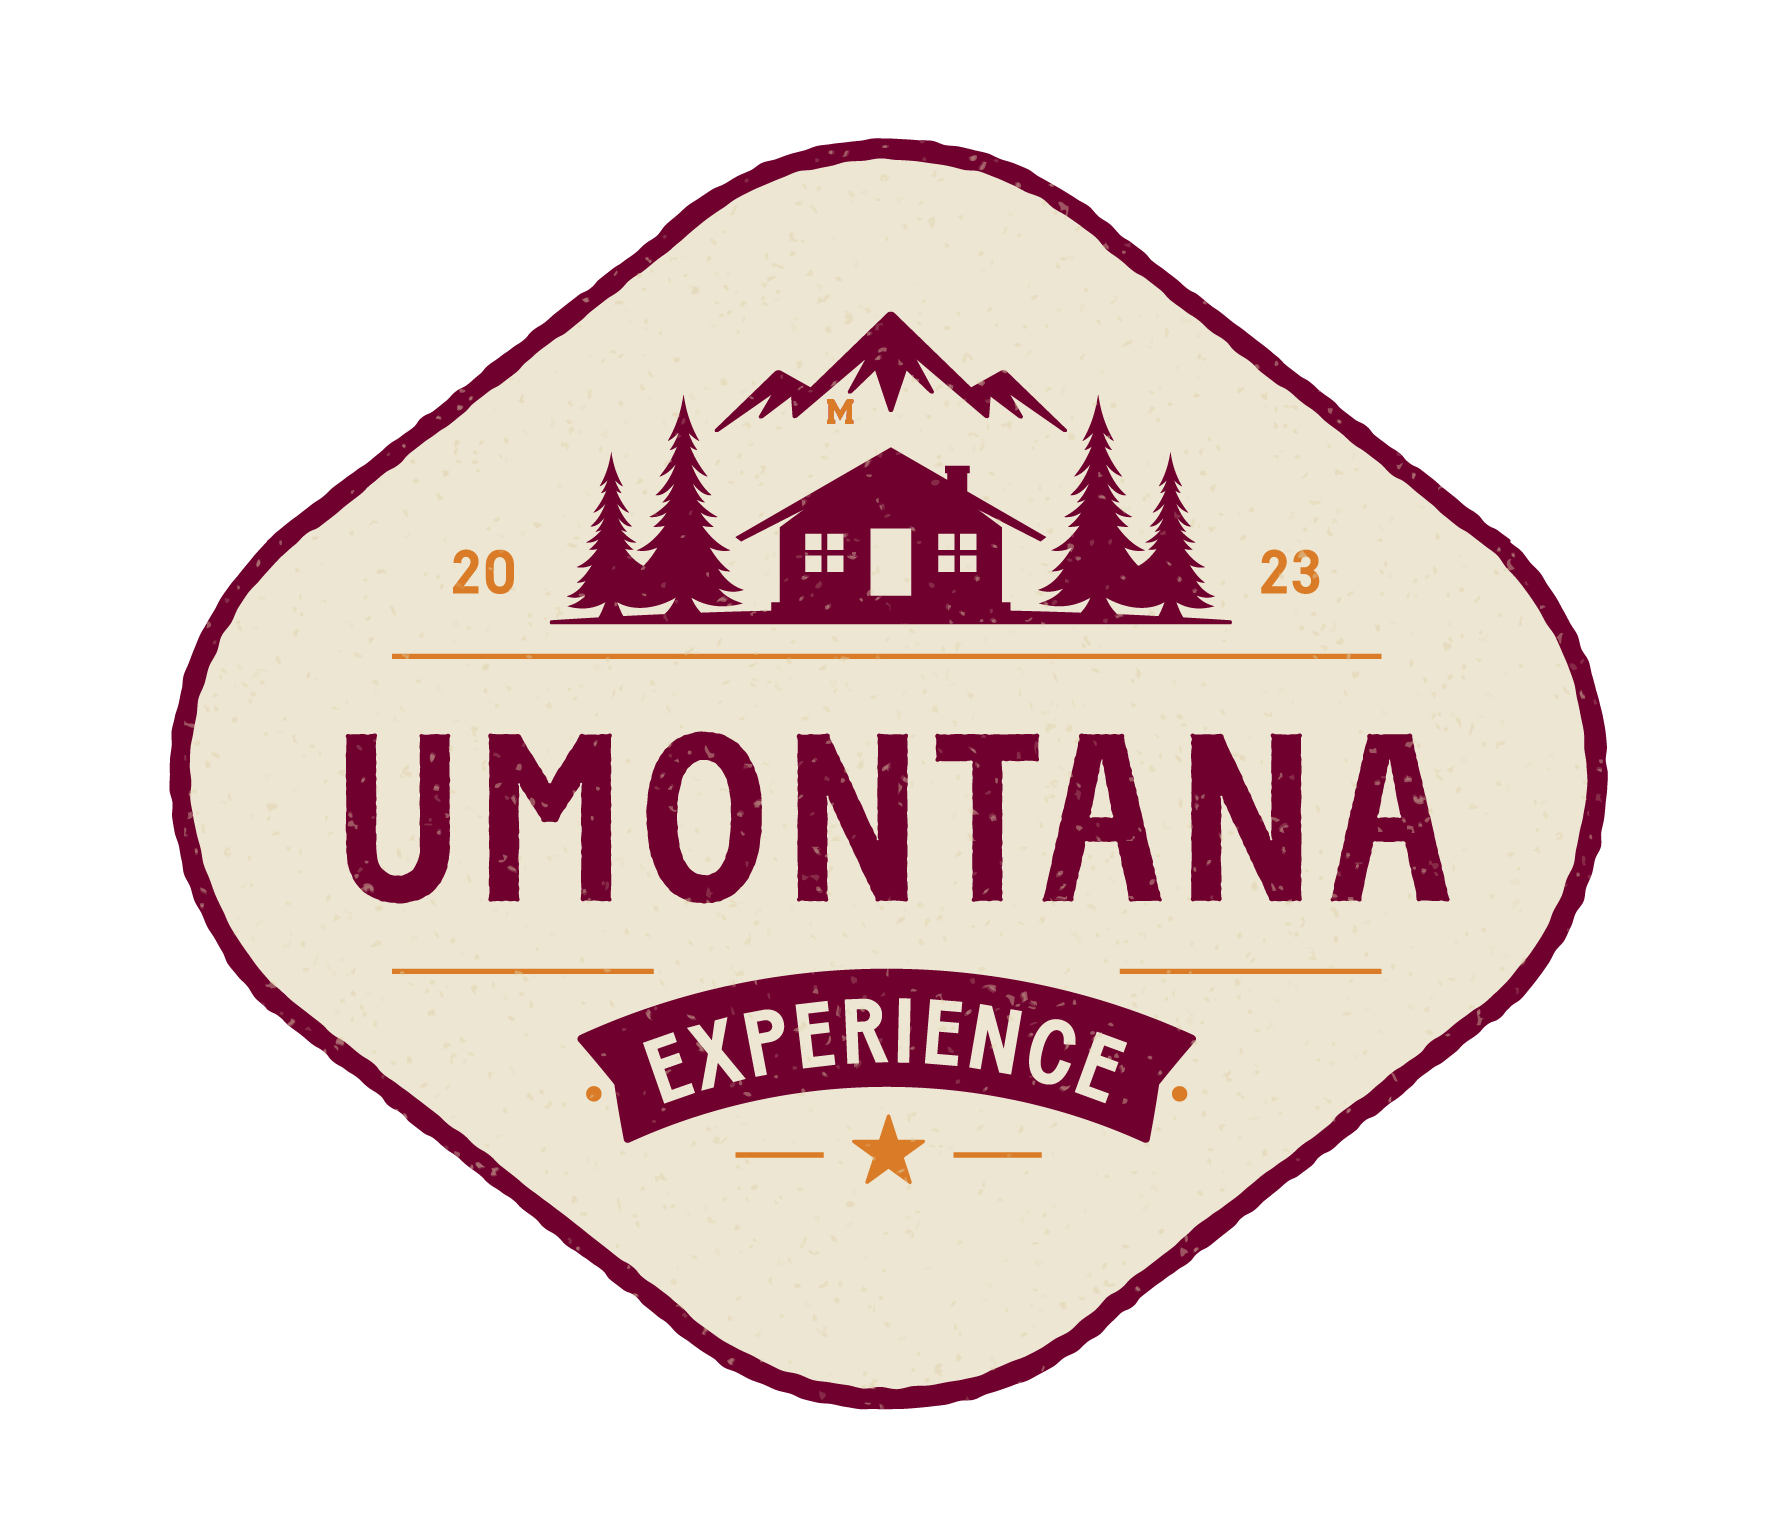 UMontana Experience logo with mountains and a cabin